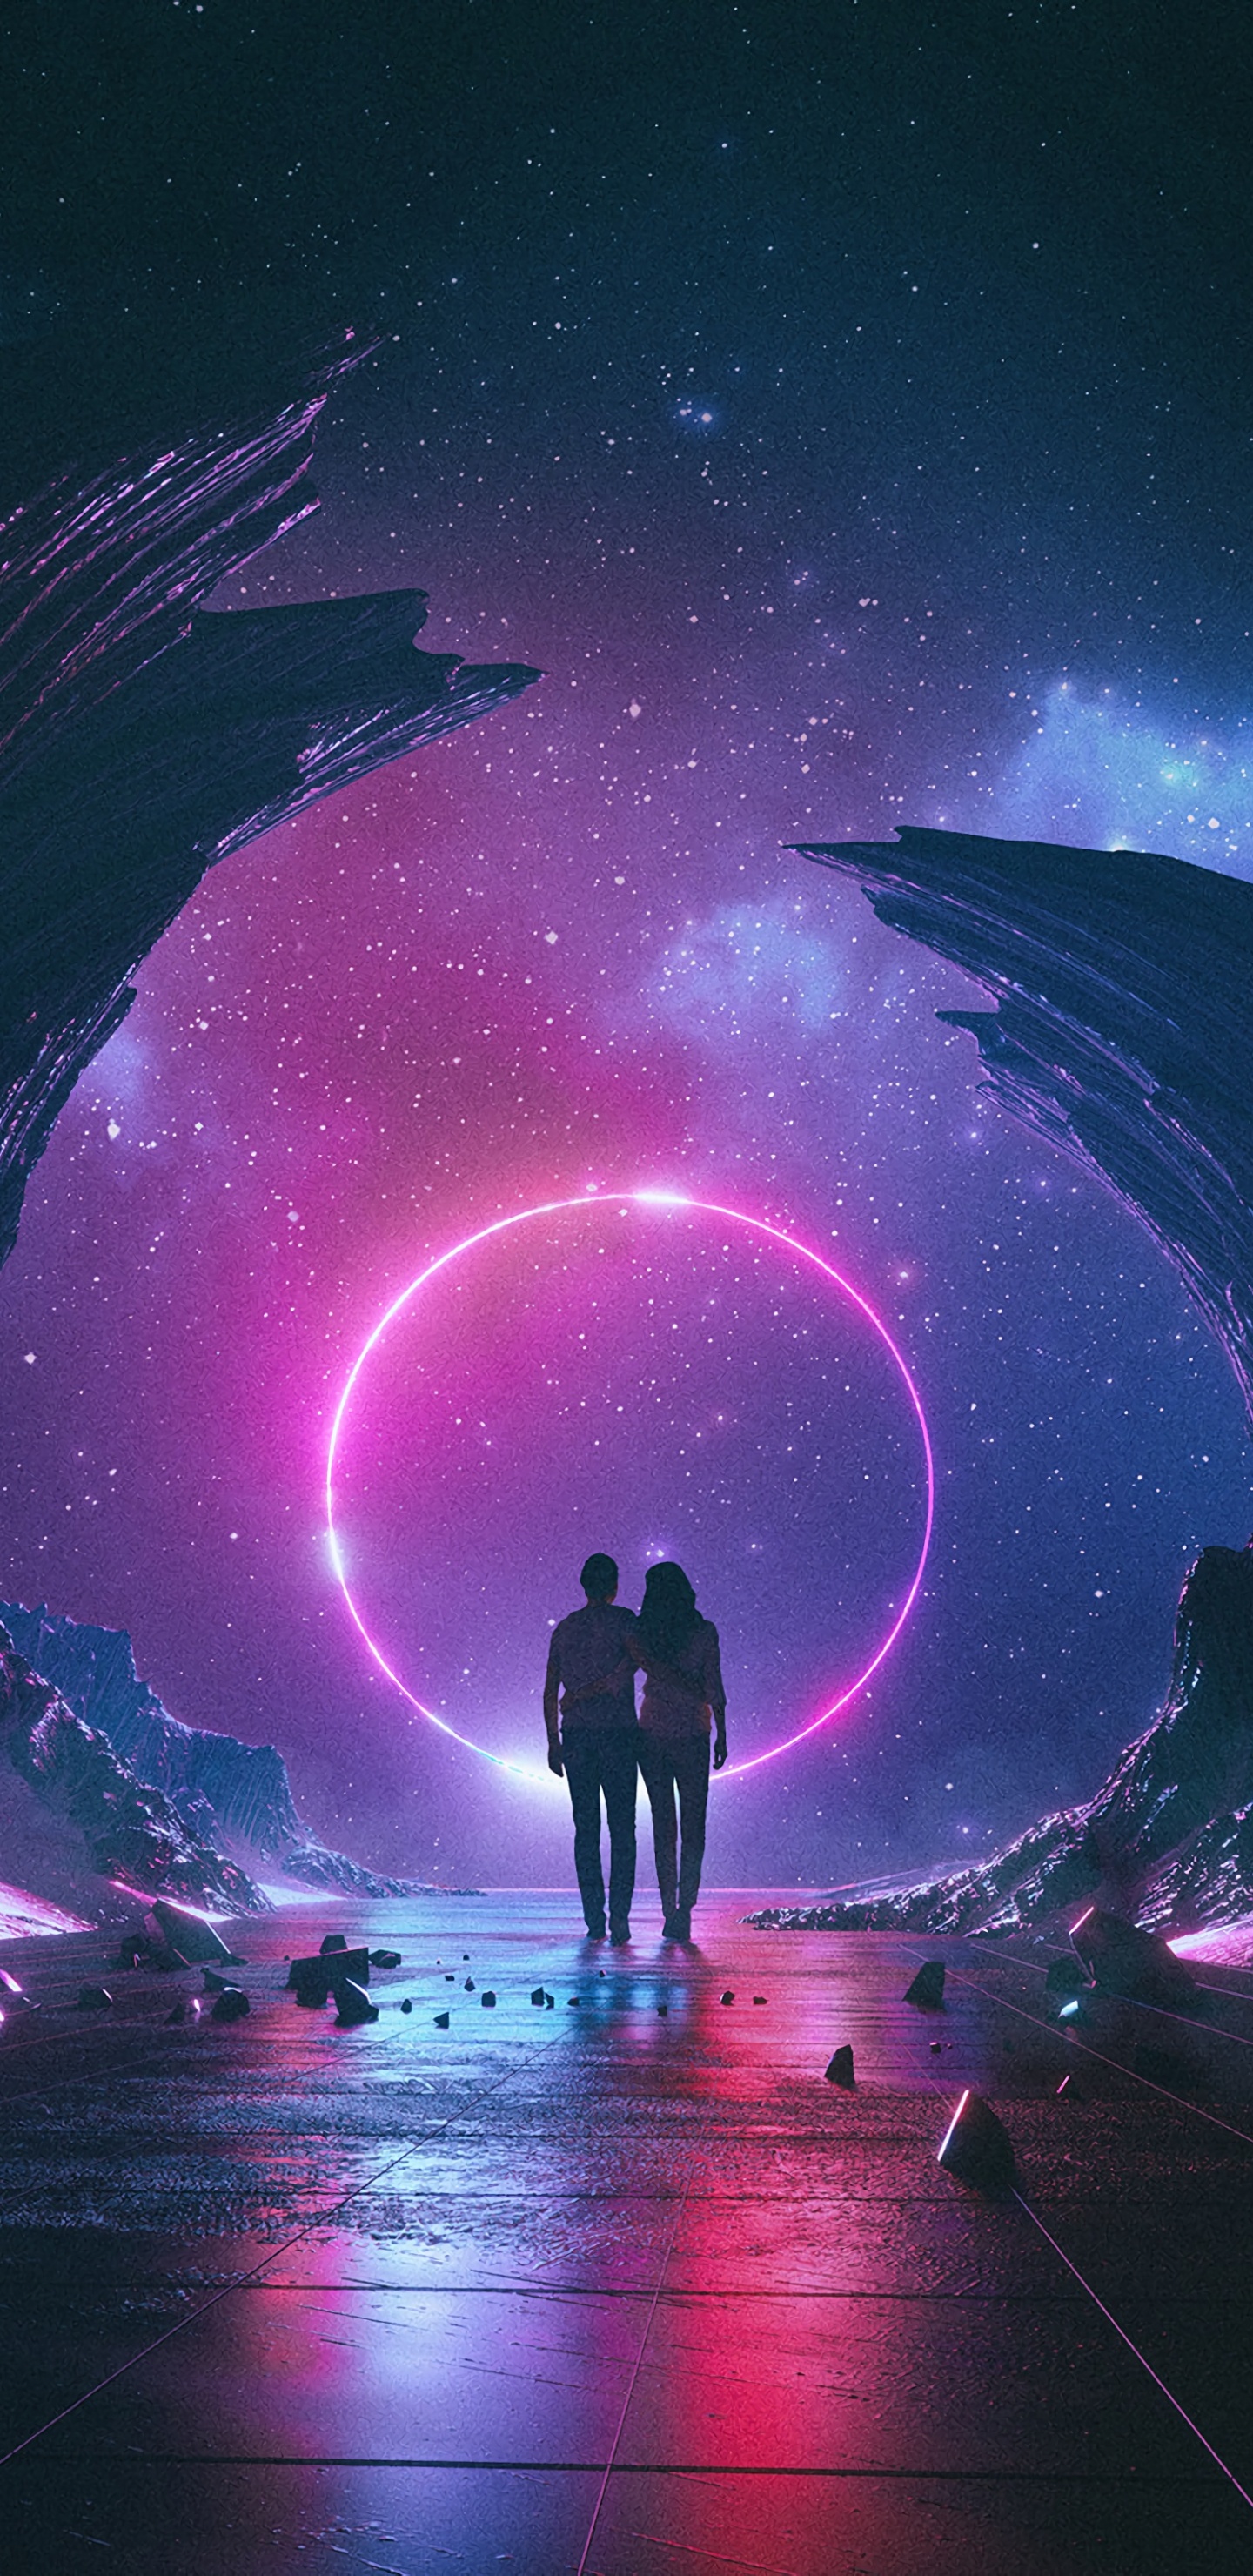 Silhouette of 2 Person Standing on The Ground Under Starry Night. Wallpaper in 1440x2960 Resolution